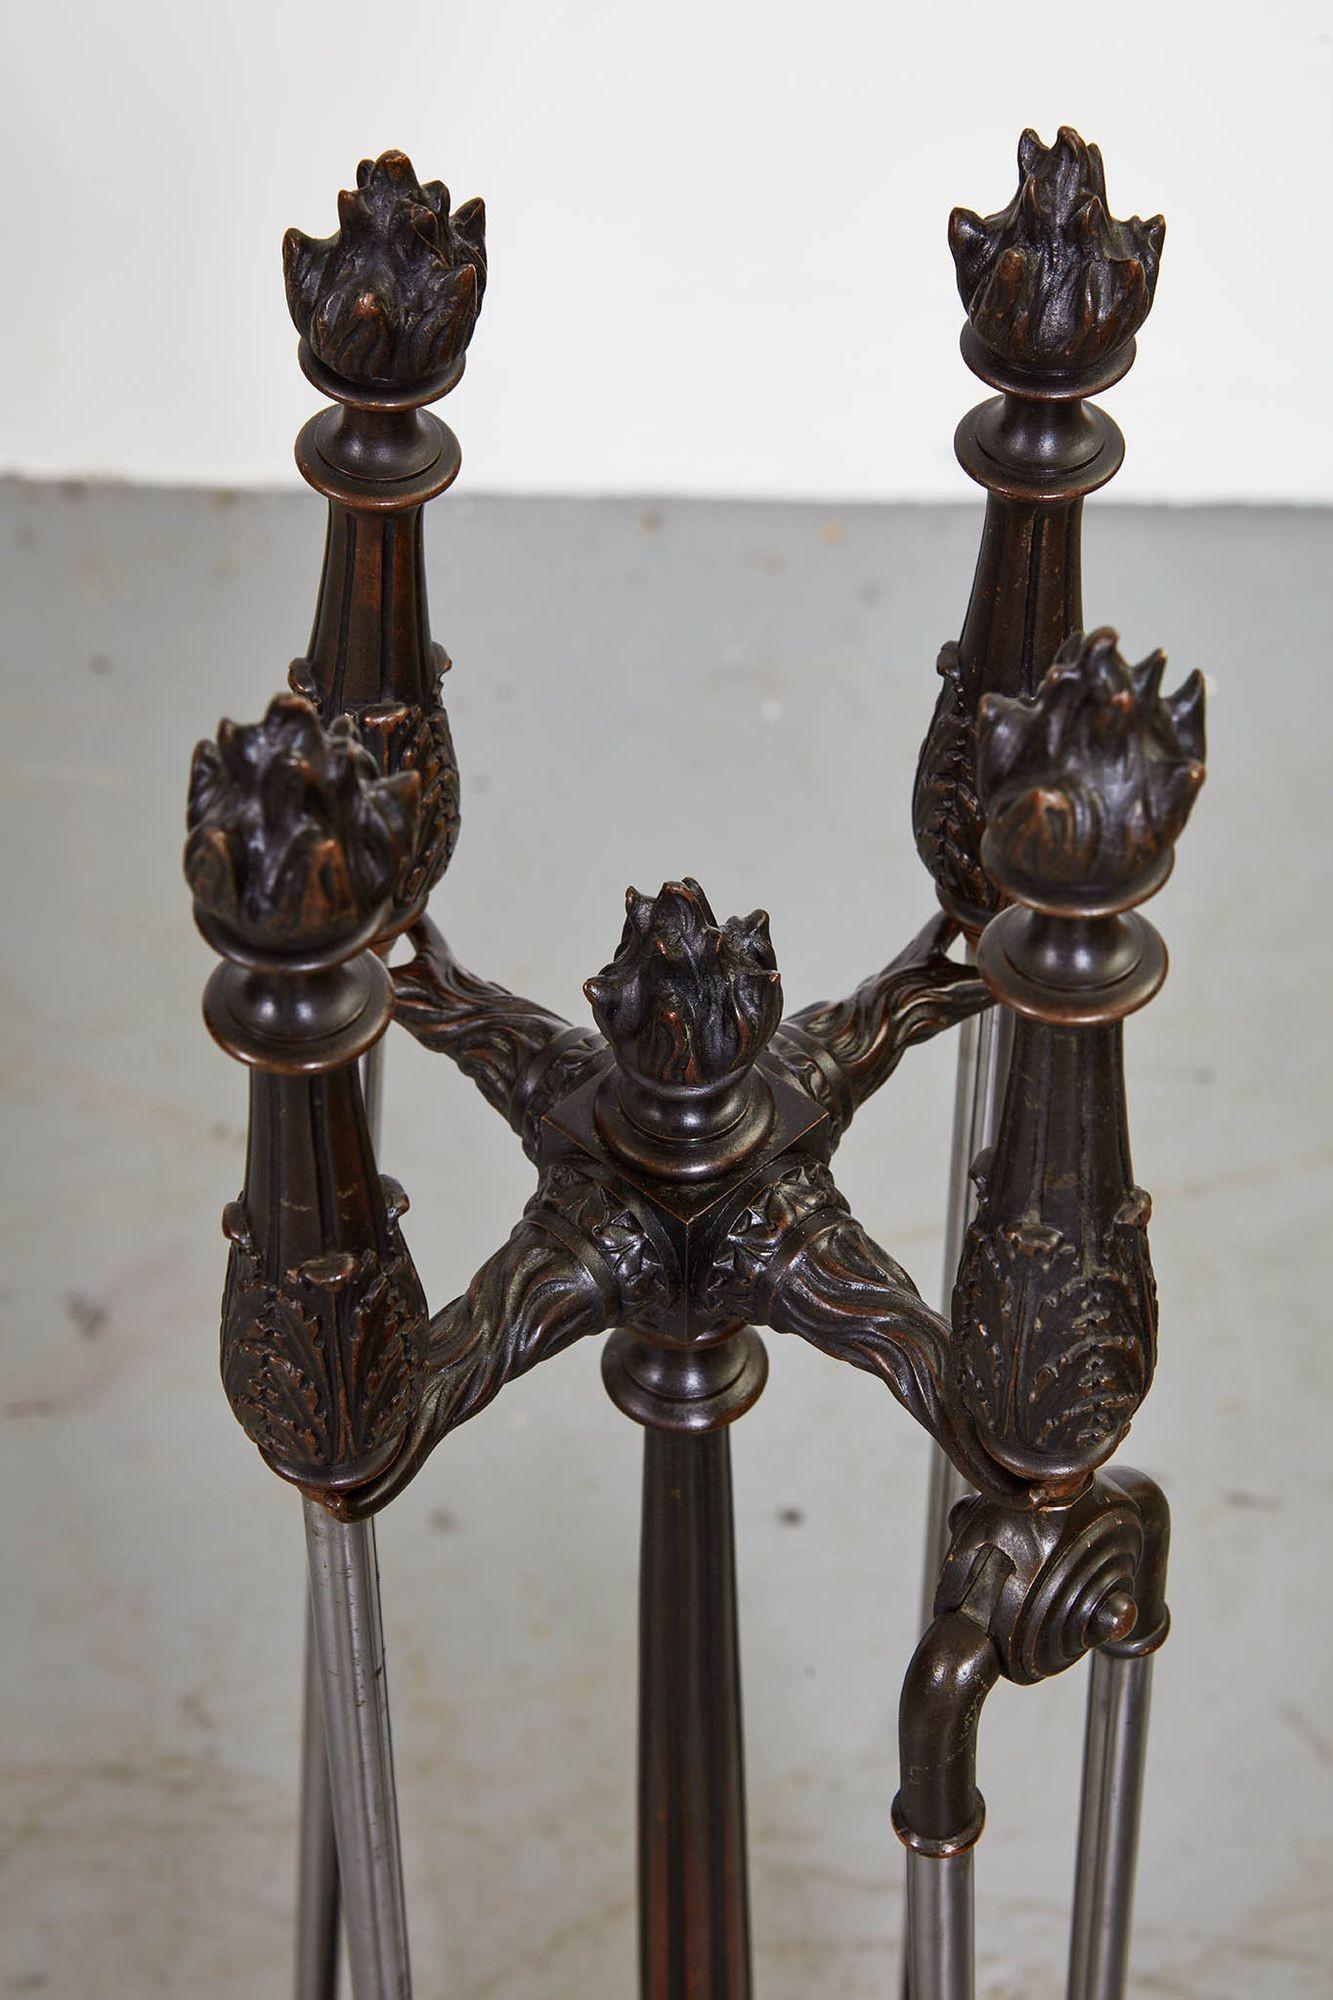 A set of four firetools with decorative flame bronze handles and polished steel shafts, consisting of a shovel, tongs, hooked poker and fireplace brush of real horsehair, on a finely cast tall bronze stand with central column topped with flame